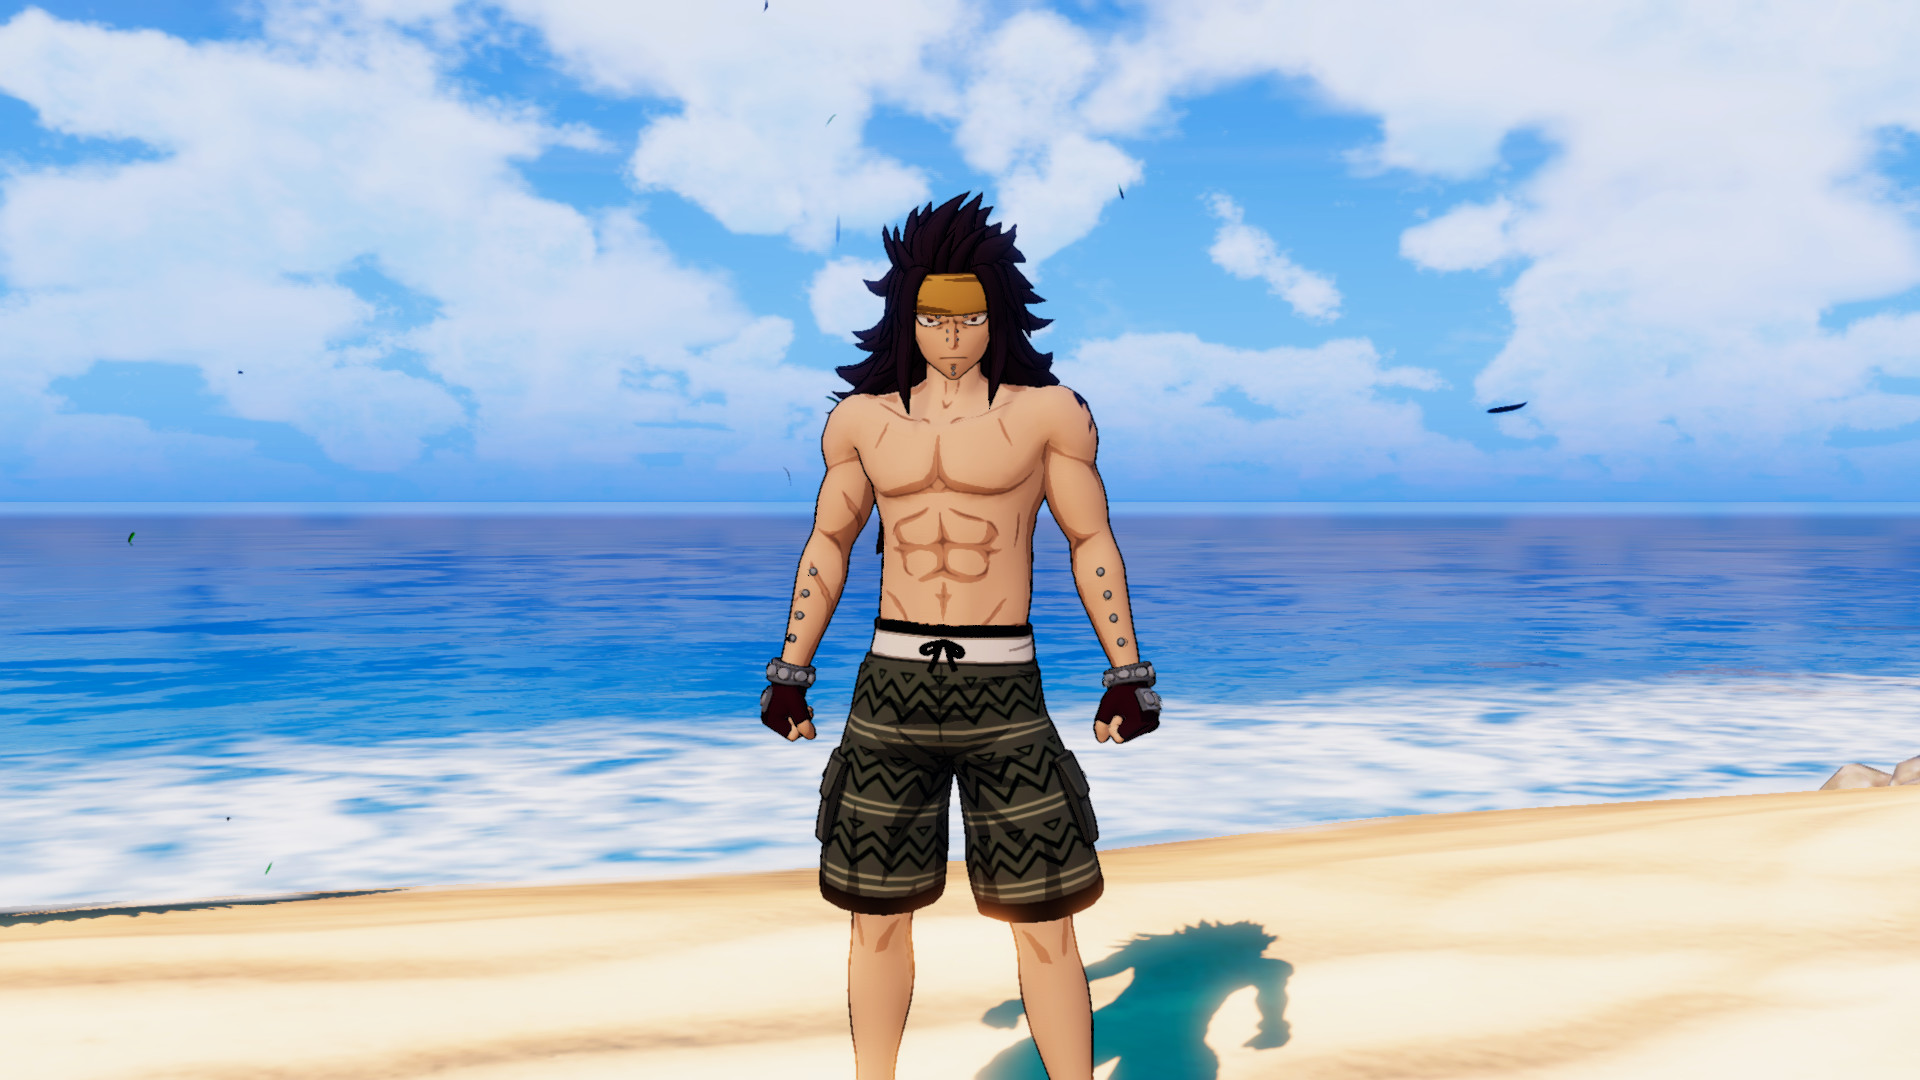 FAIRY TAIL: Gajeel's Costume "Special Swimsuit" screenshot